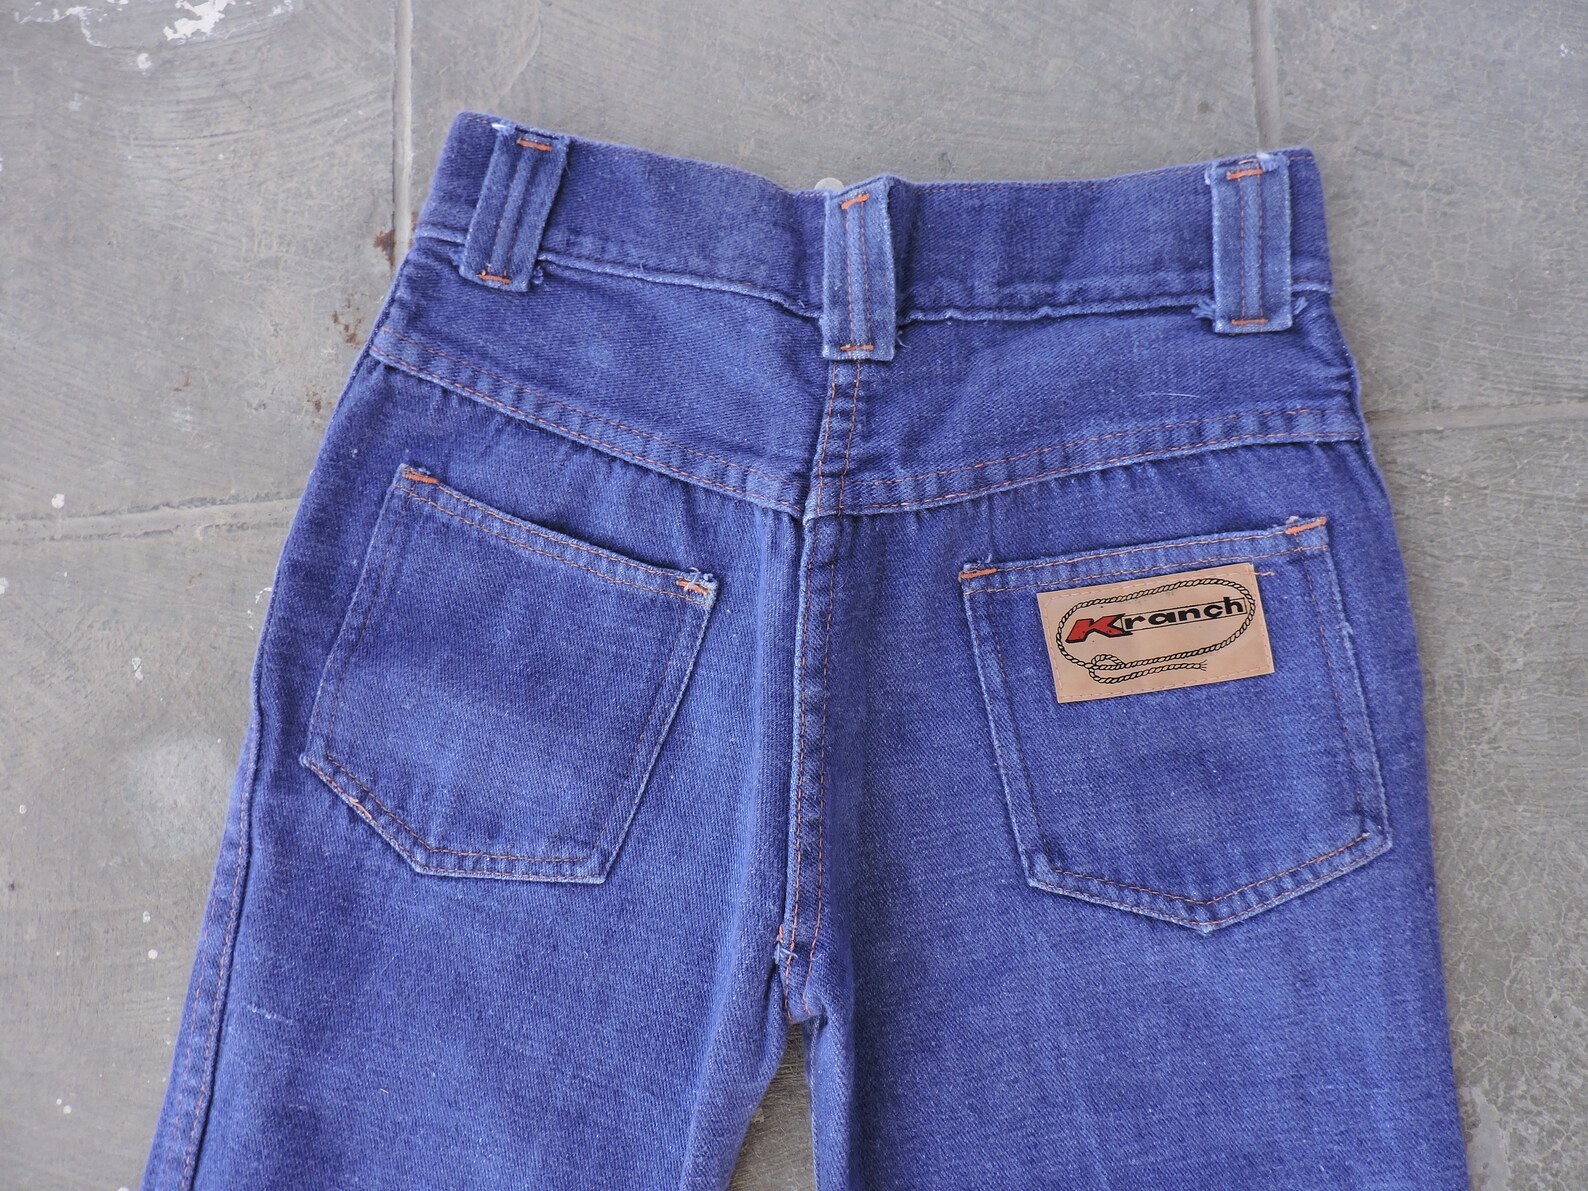 BEAT to HELL Rare Vintage 70s K Ranch Denim Bell Bottoms - Etsy